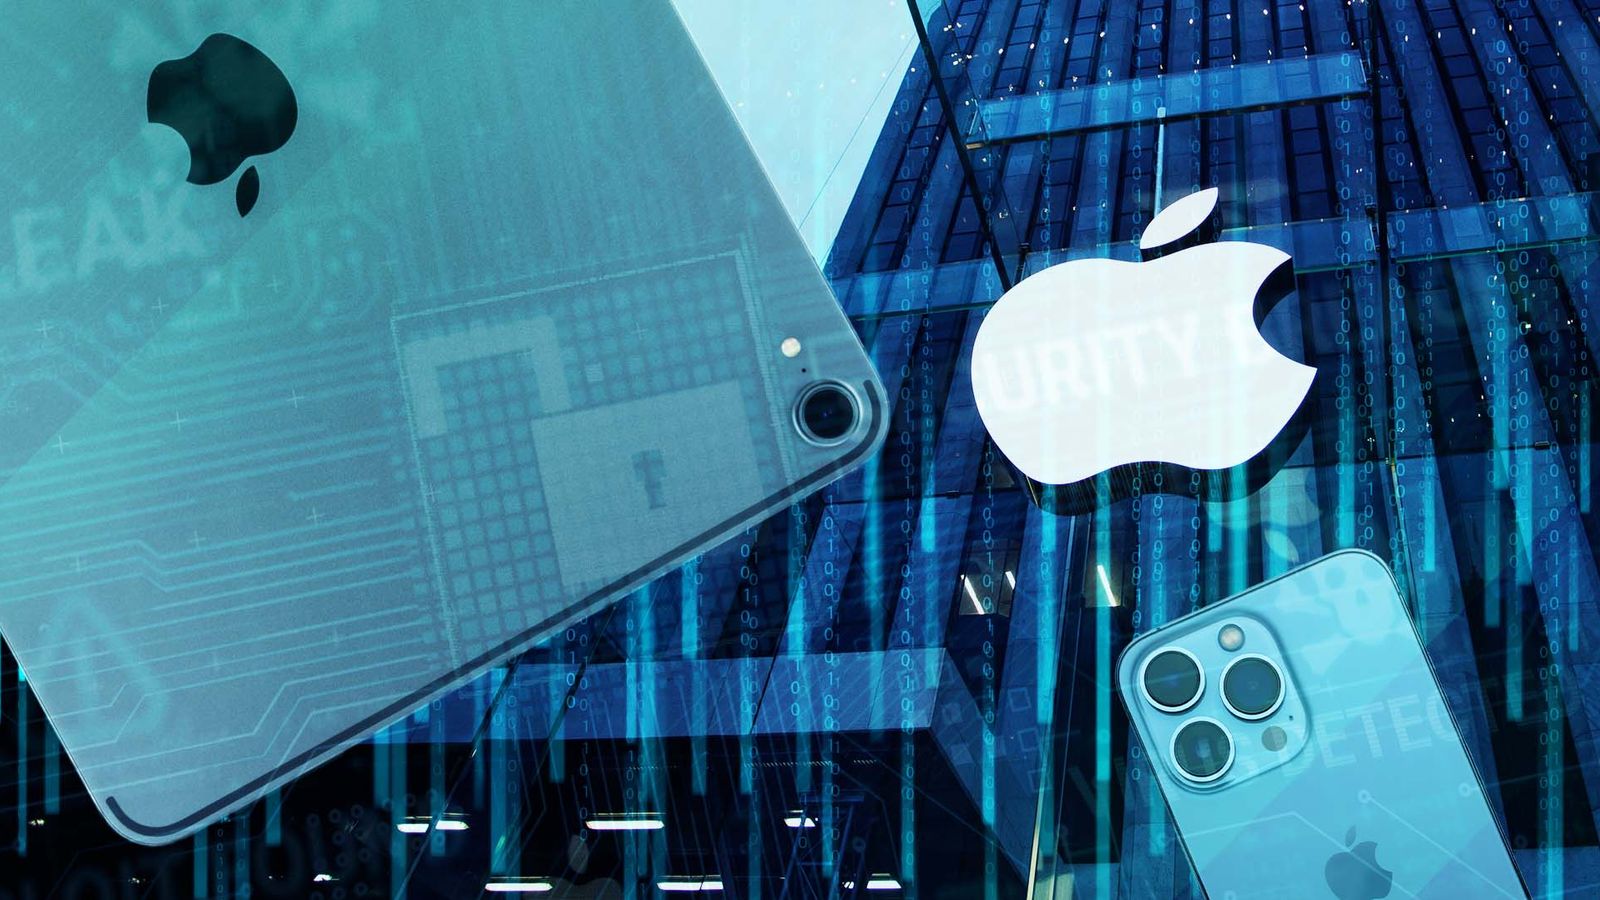 What is the new serious Apple vulnerability and how do you protect yourself from it?